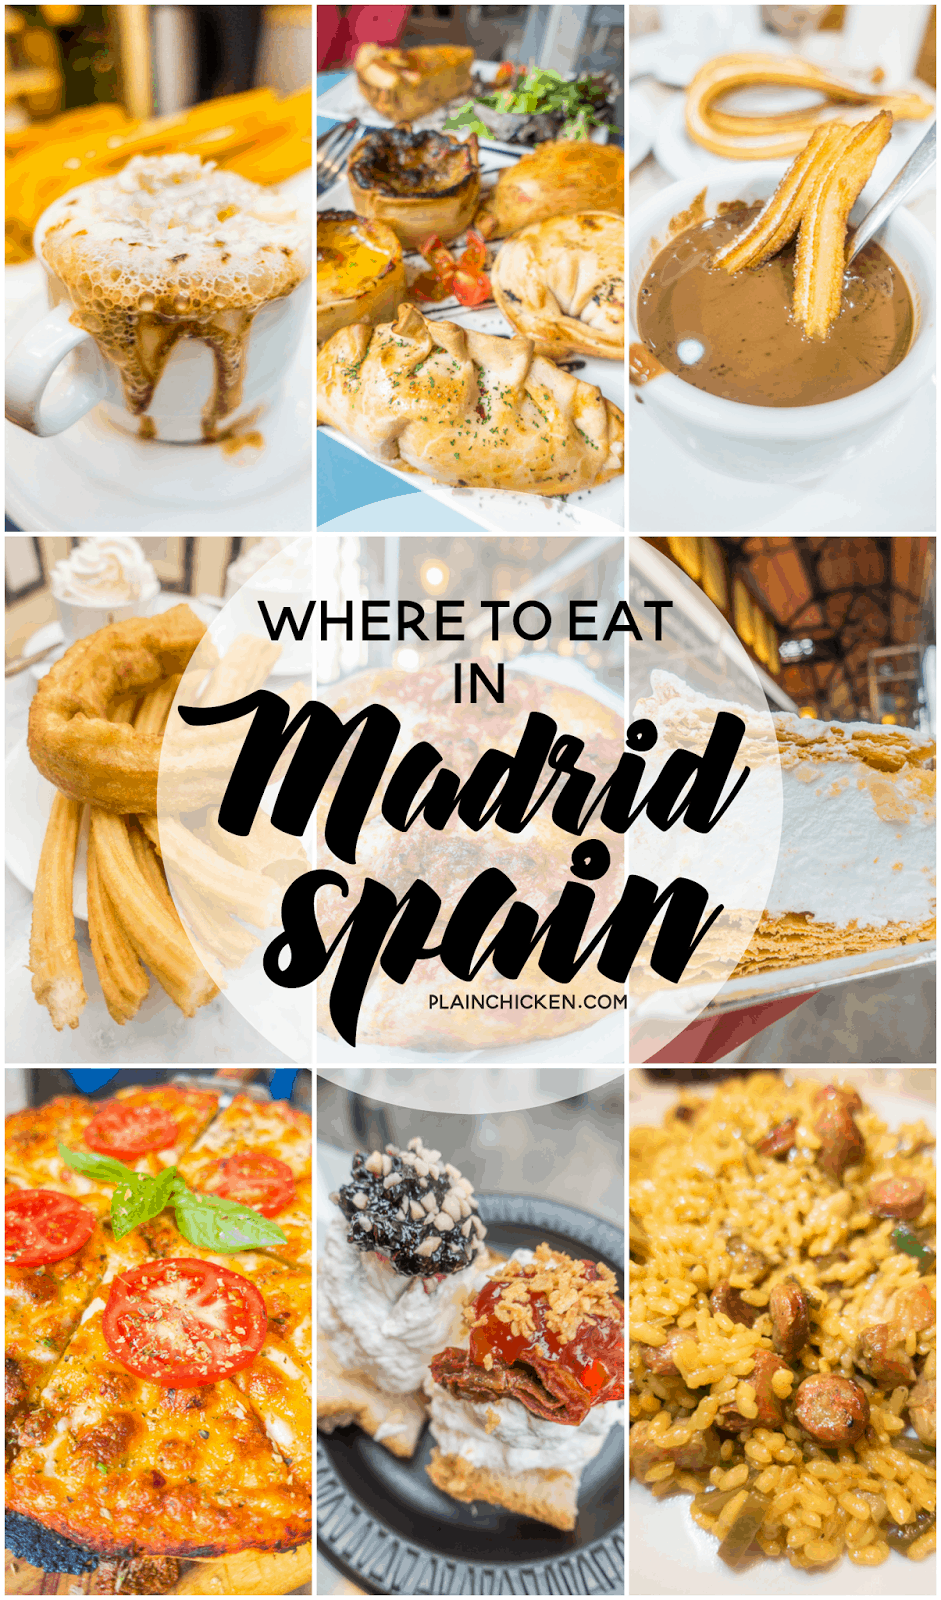 Where to eat in Madrid Spain - the best paella, churros and chocolate, and tapas. Some hidden gems that you must add to you list!